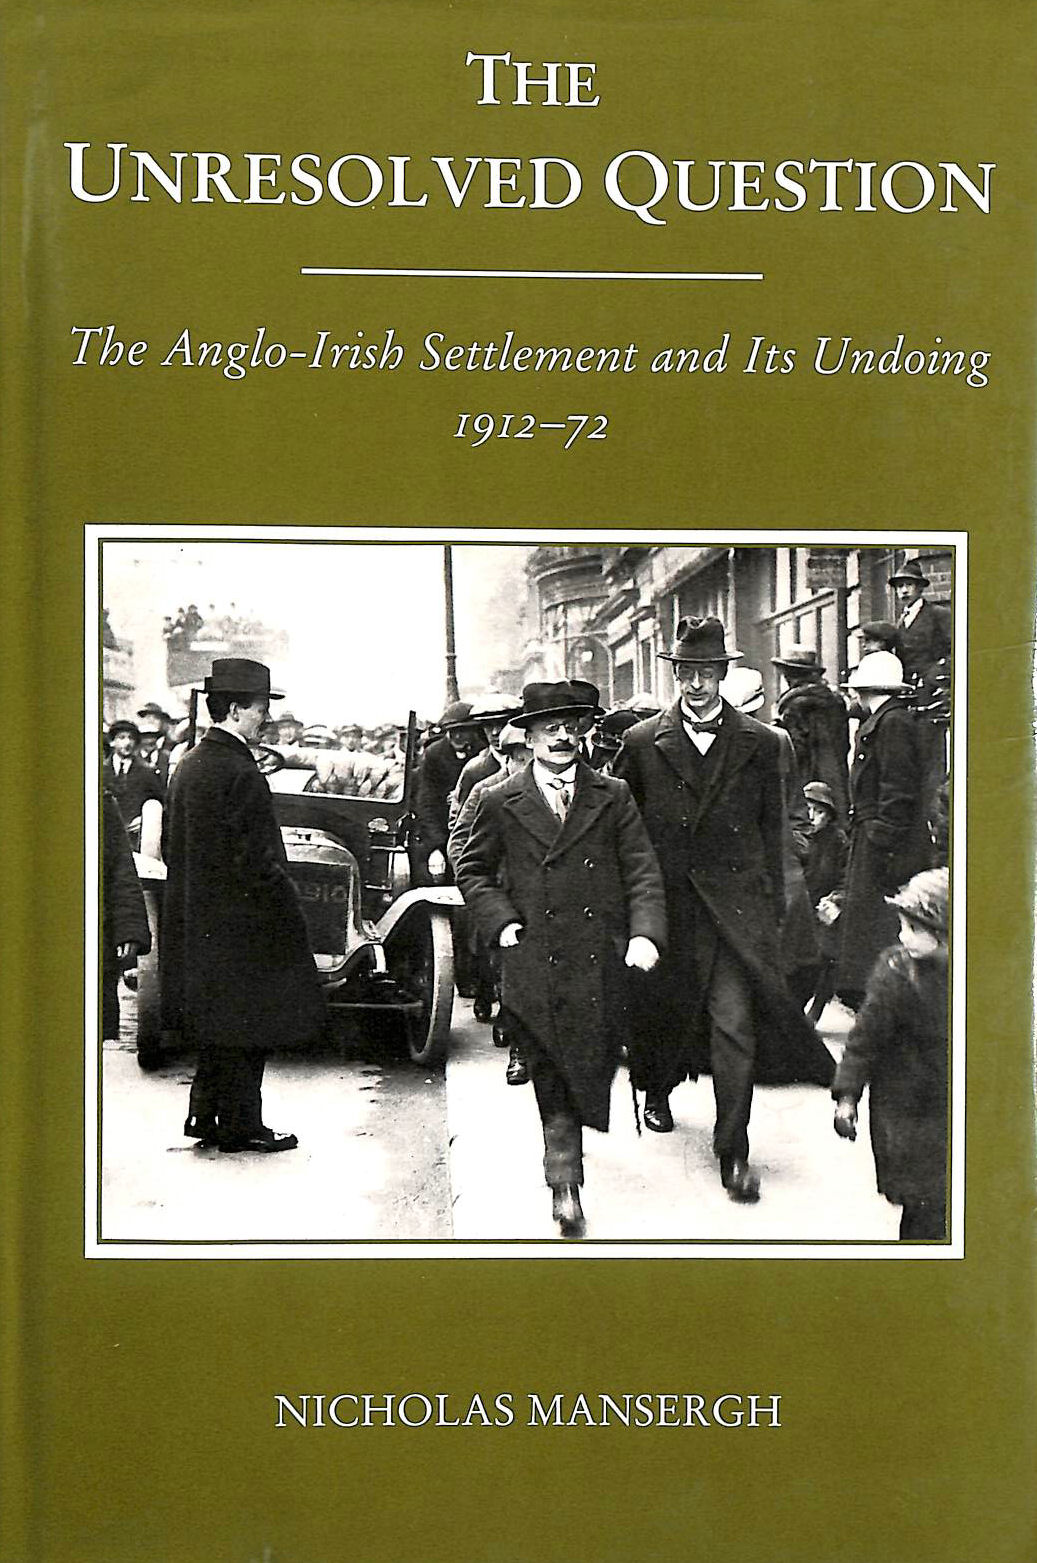  - The Unresolved Question: The Anglo-Irish Settlement and Its Undoing, 1912-72